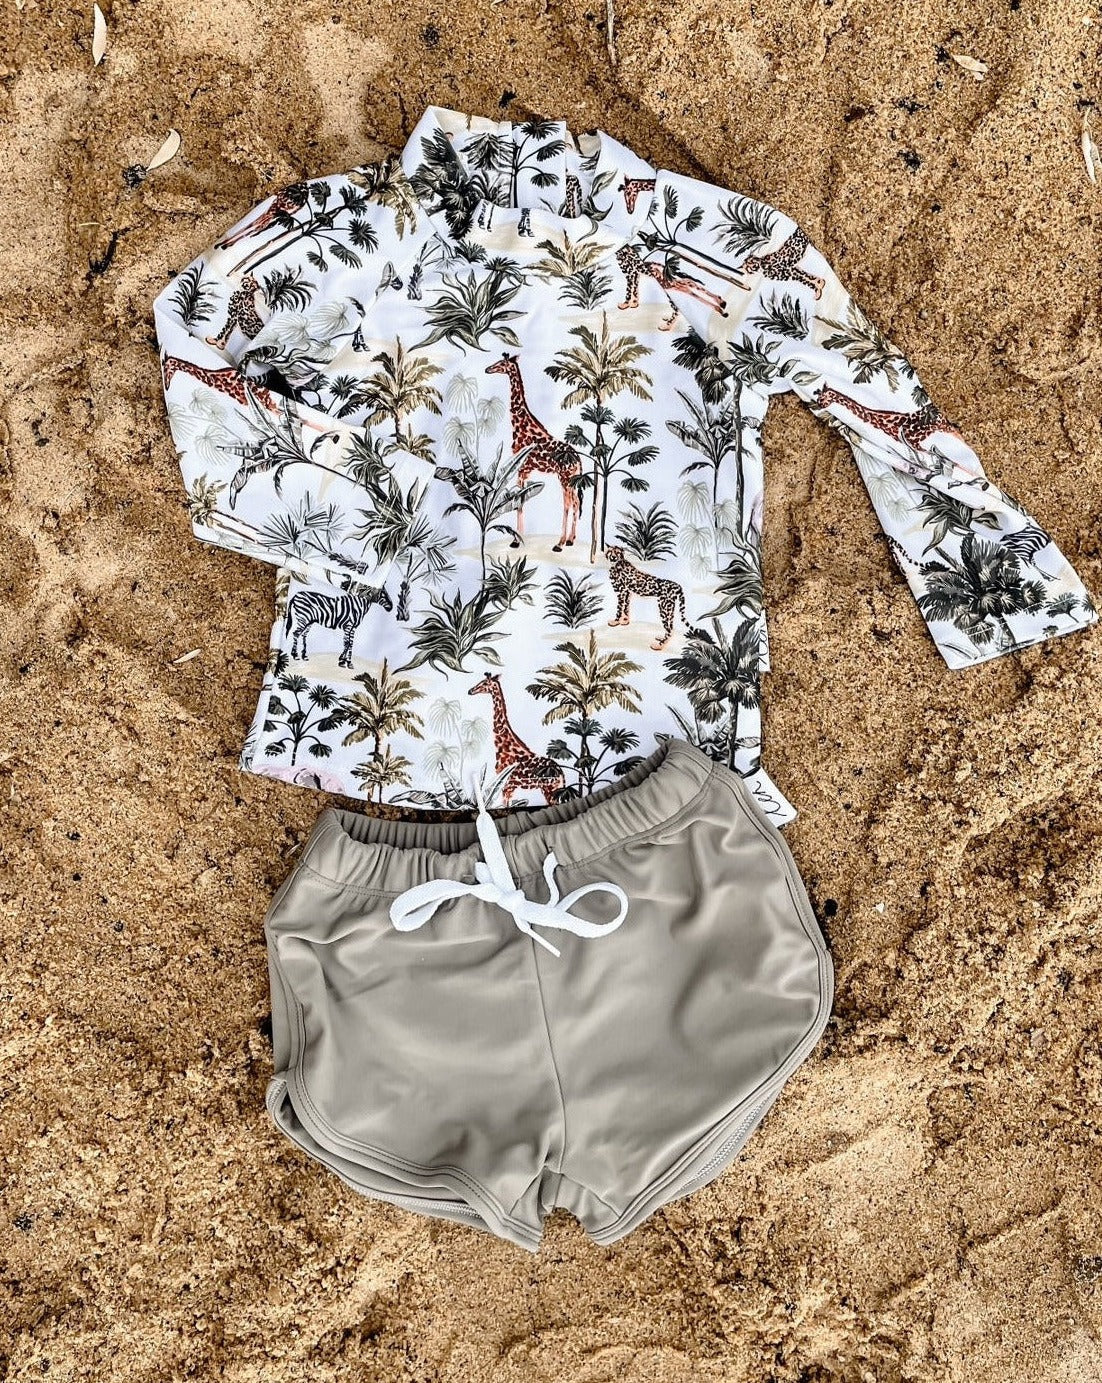 Baby and childs swimsuit with girrafes, zebras, tigers and elephants on it.